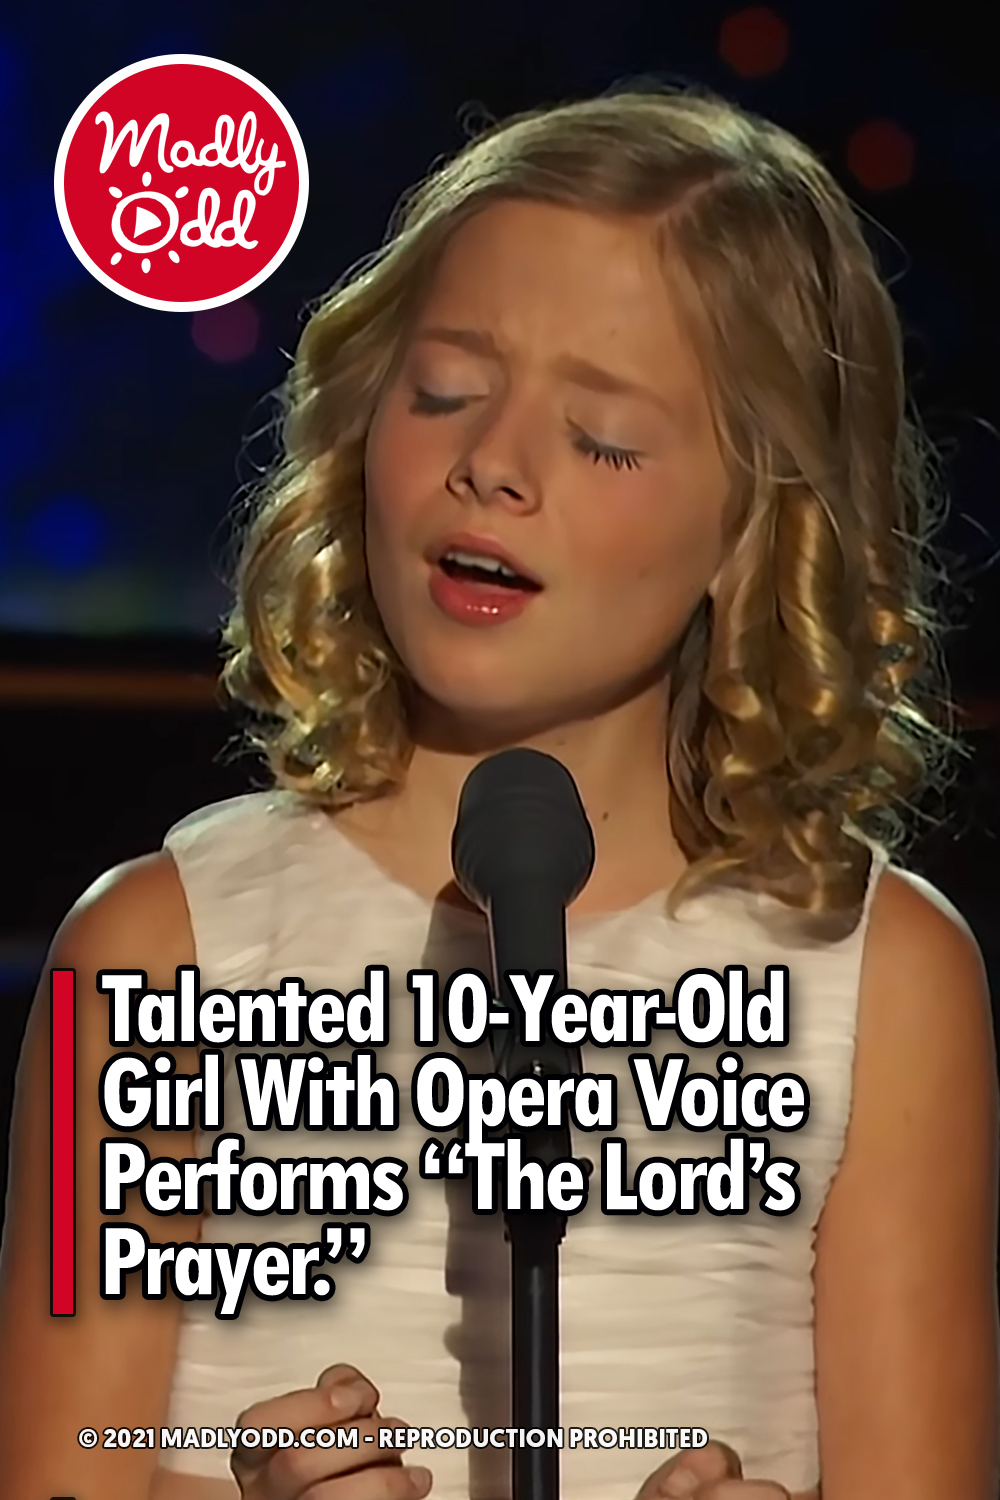 Talented 10-Year-Old Girl With Opera Voice Performs “The Lord’s Prayer.”